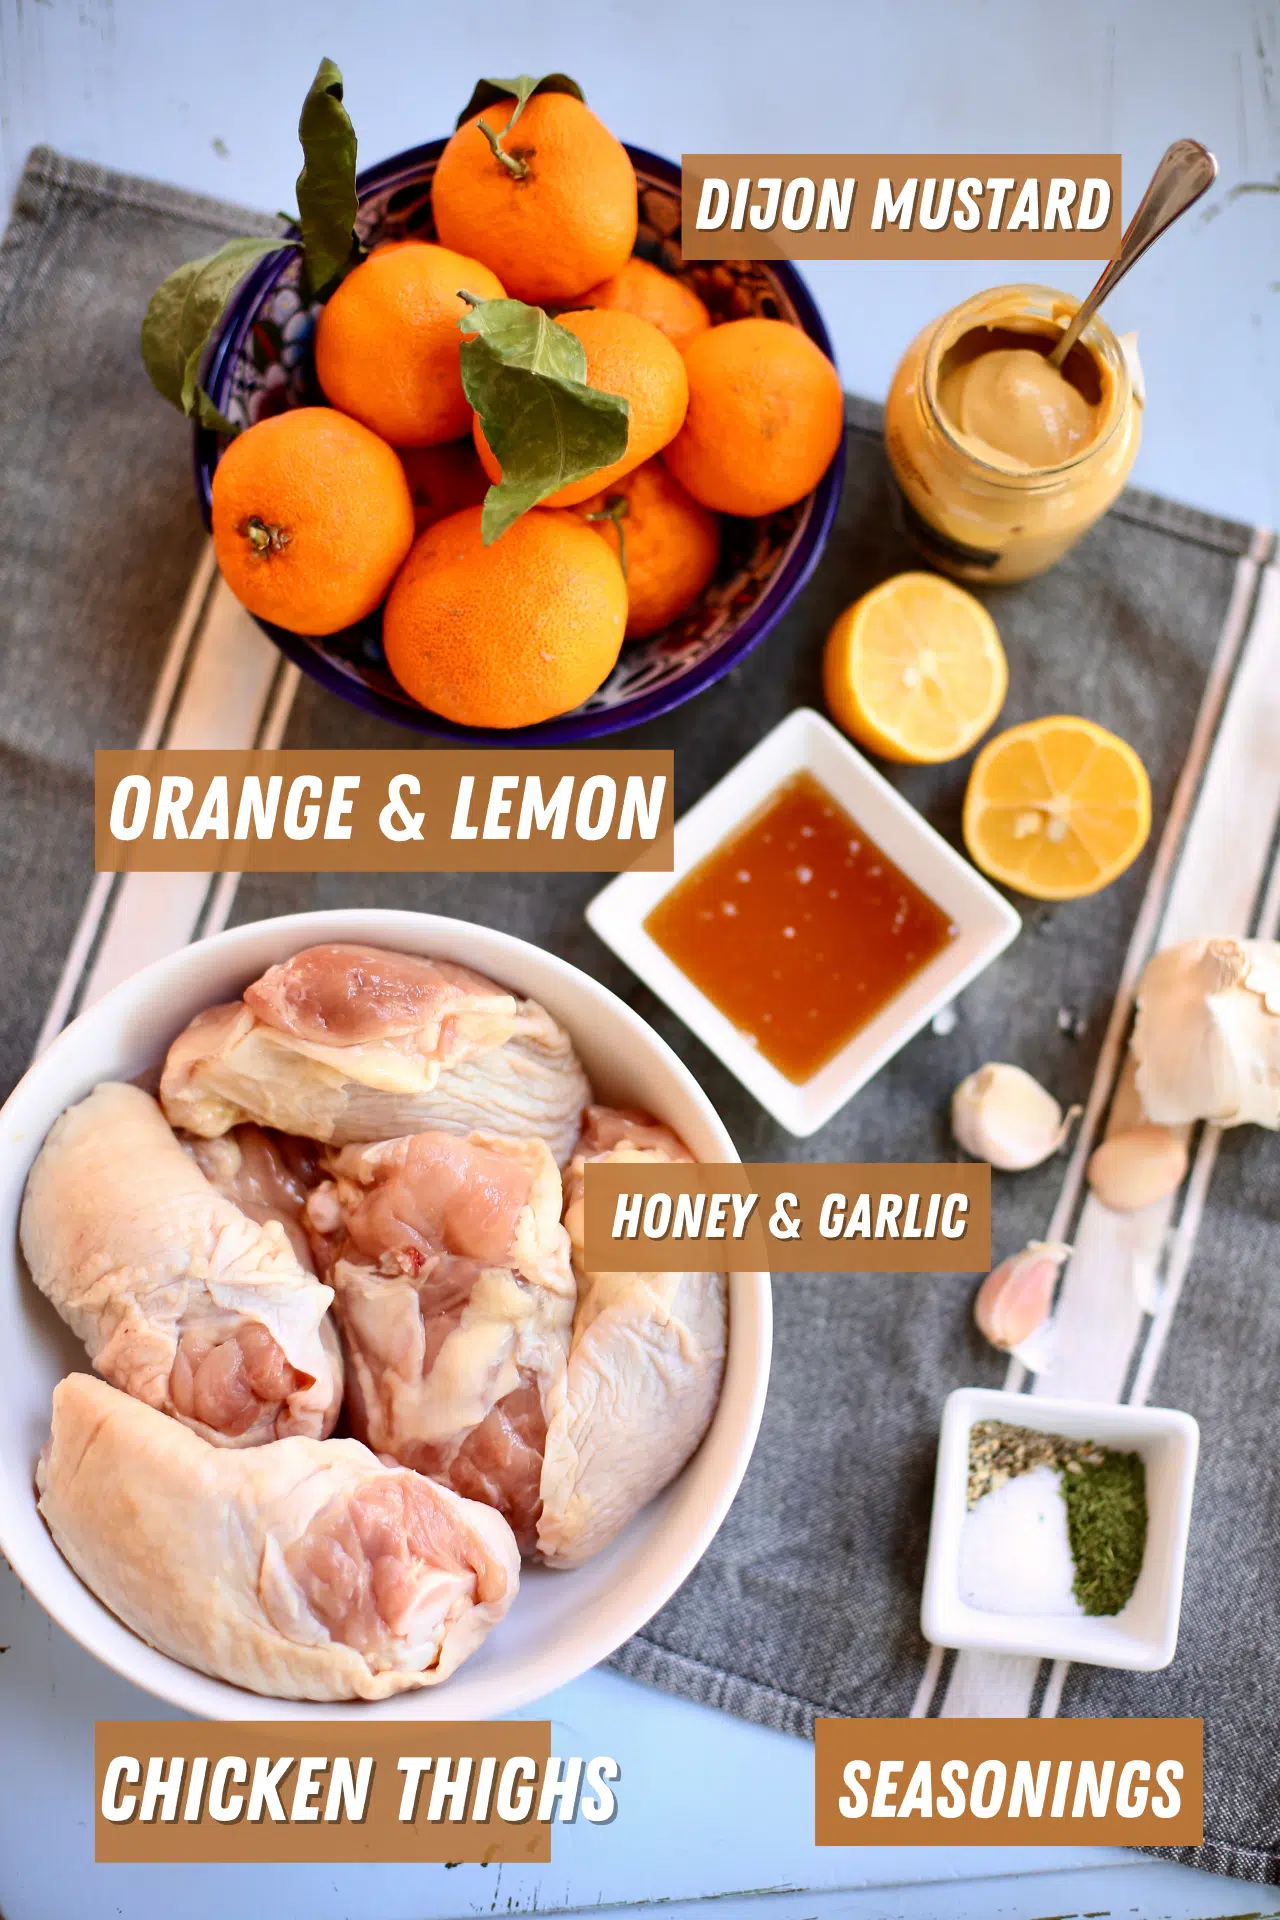 a gray tablecloth is behind several ingredients: oranges and lemons, chicken thighs, honey, garlic and seasonings.